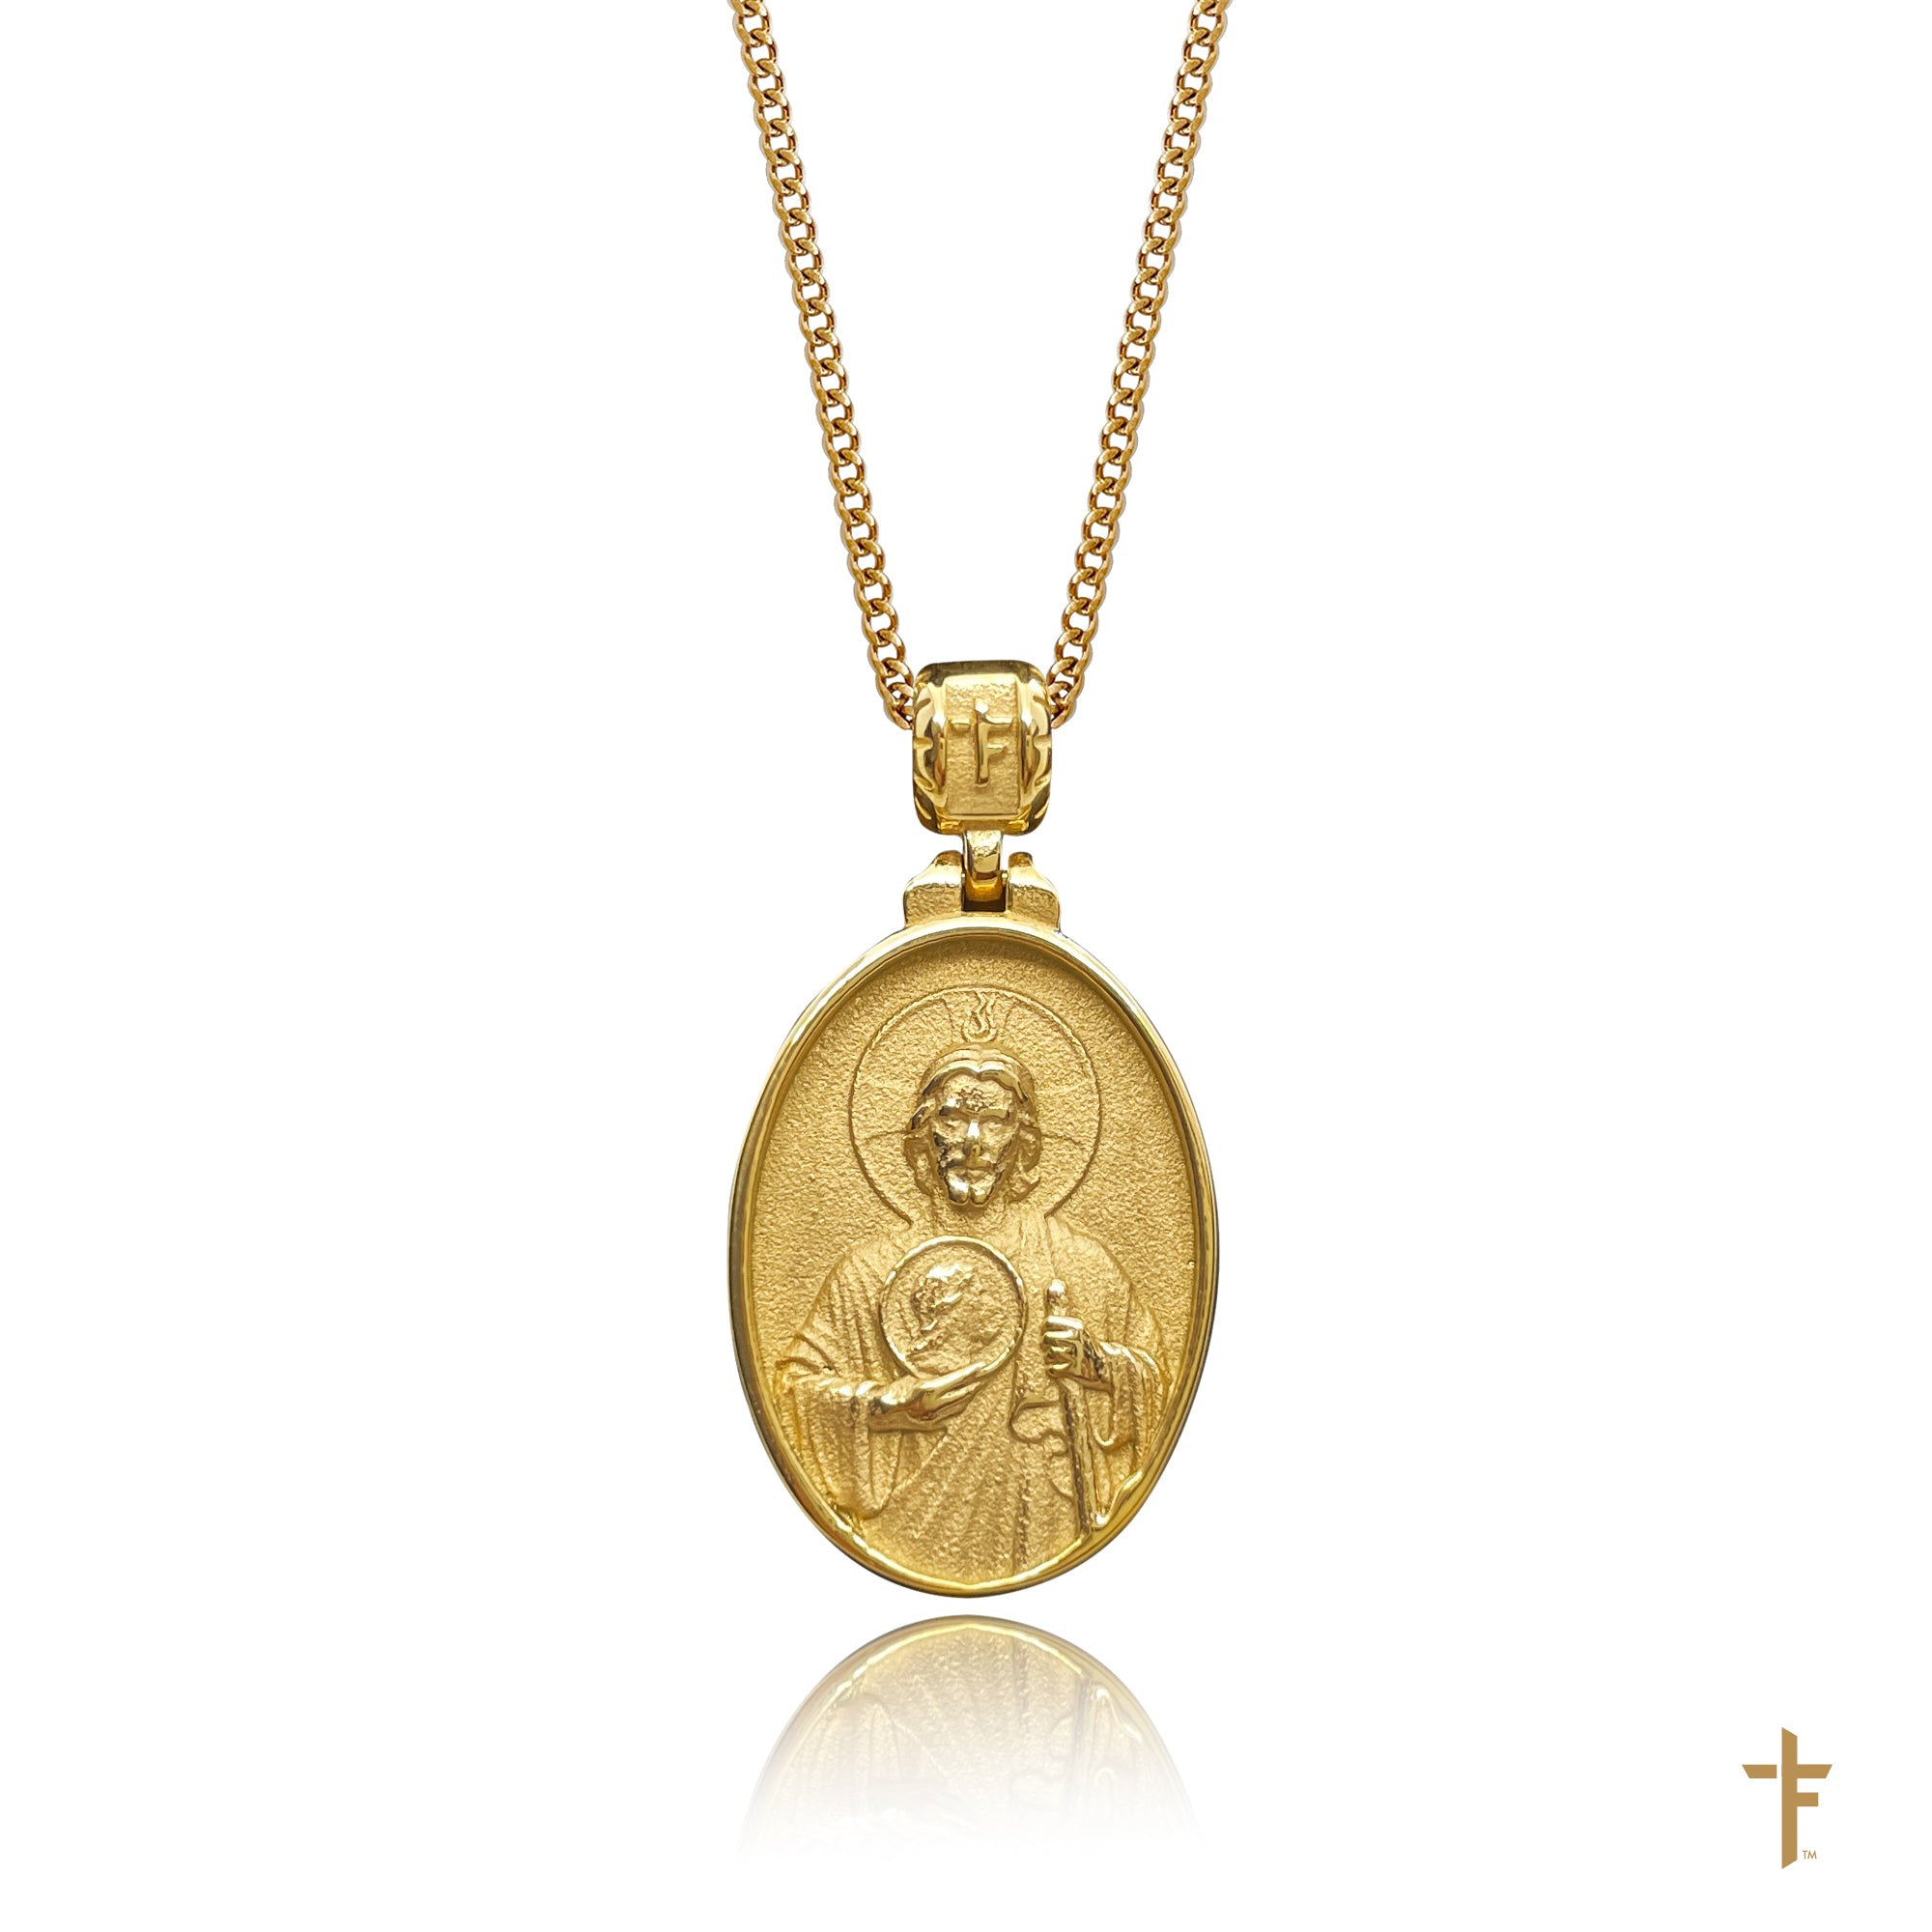 St Jude Necklace - Robin Terman